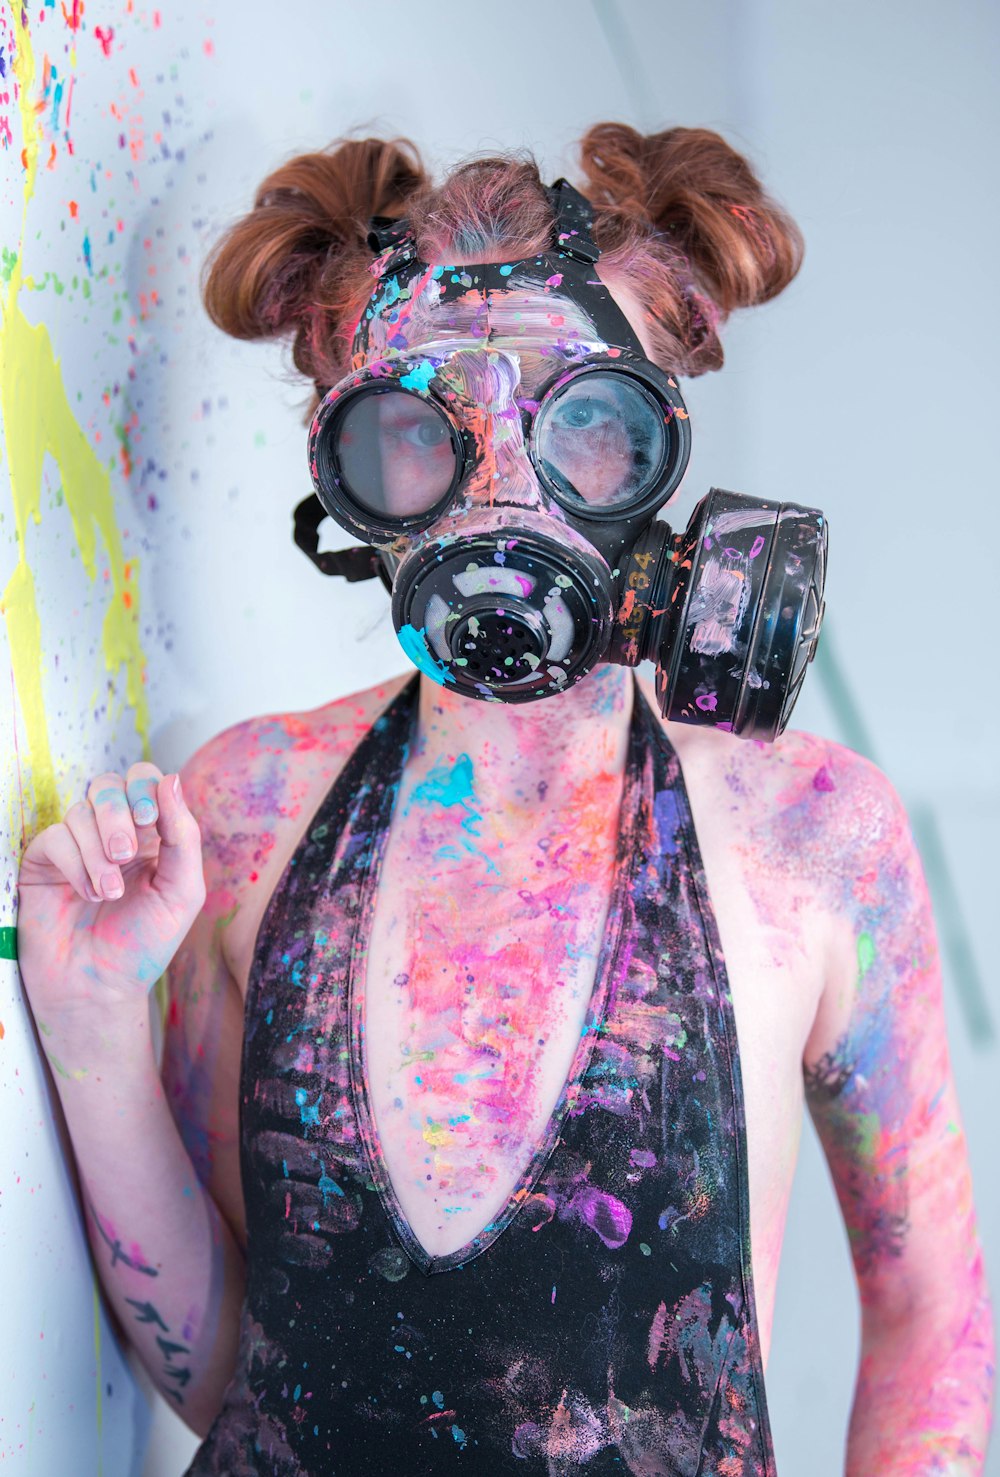 multicolored paint splattered woman wearing black monokini and gas mask standing beside wall